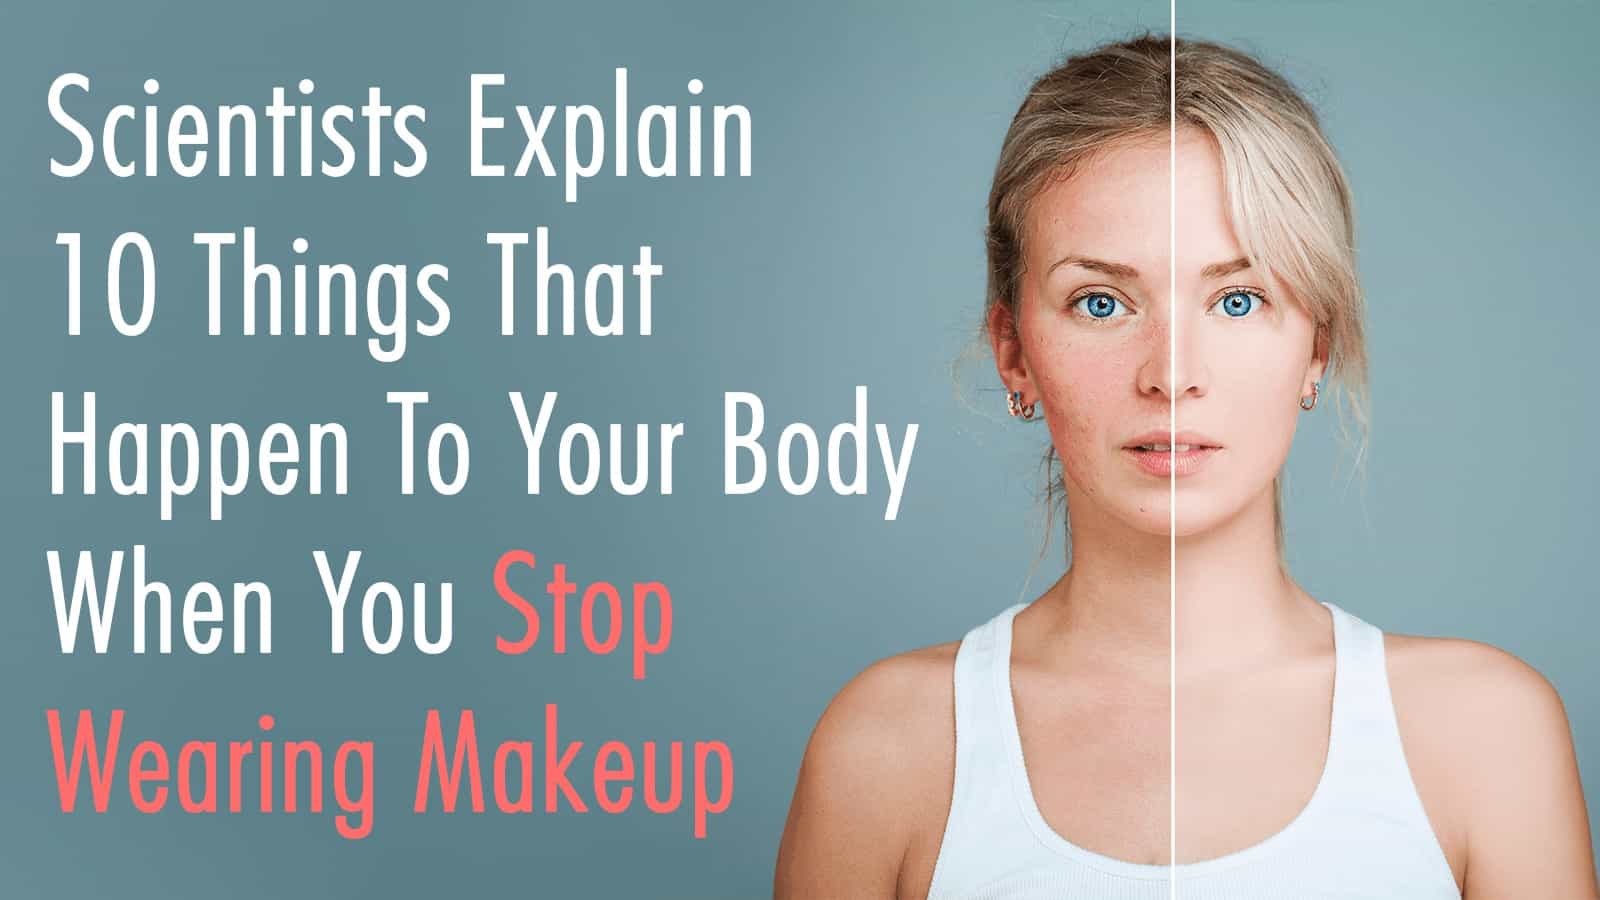 Scientists Explain 10 Things That Happen To Your Body When You Stop Wearing Makeup